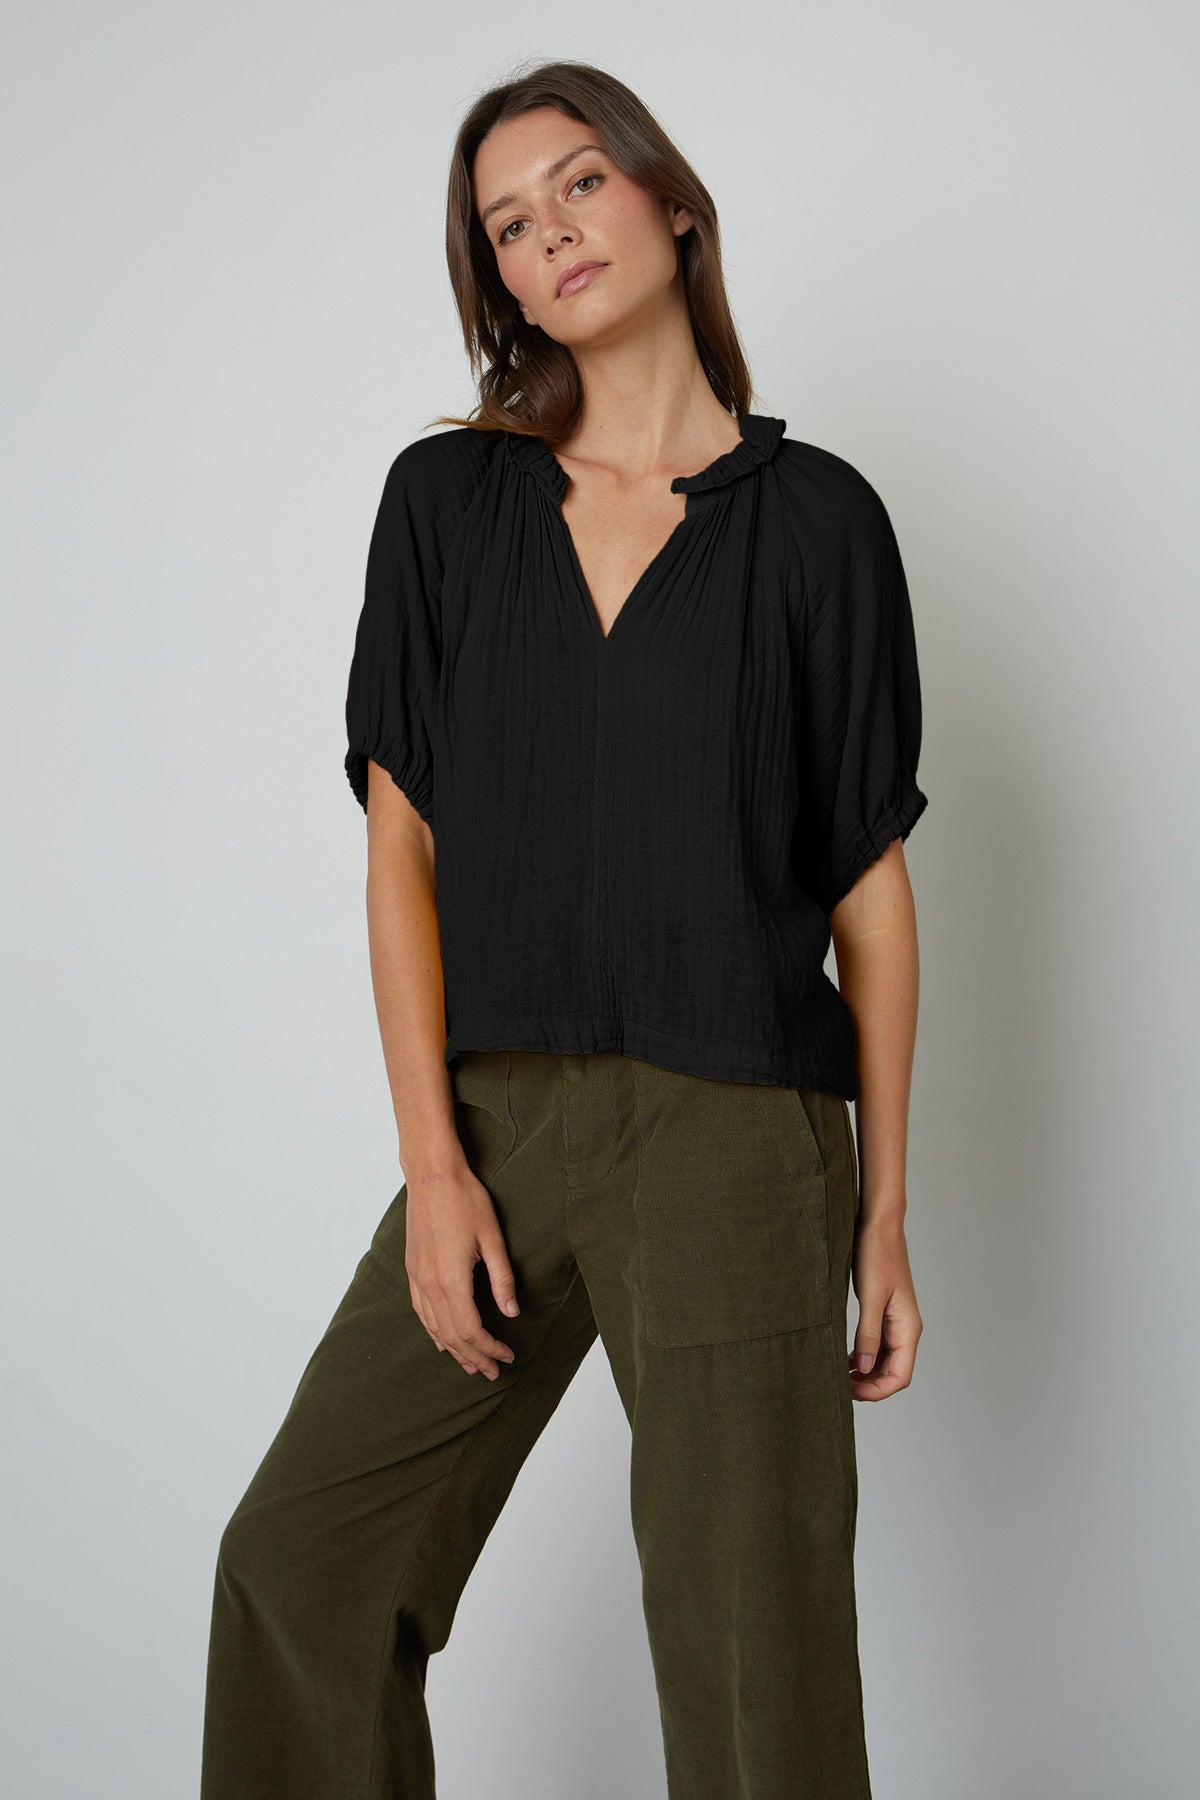   Annette Cotton Gauze Top in black full view with vera pants 